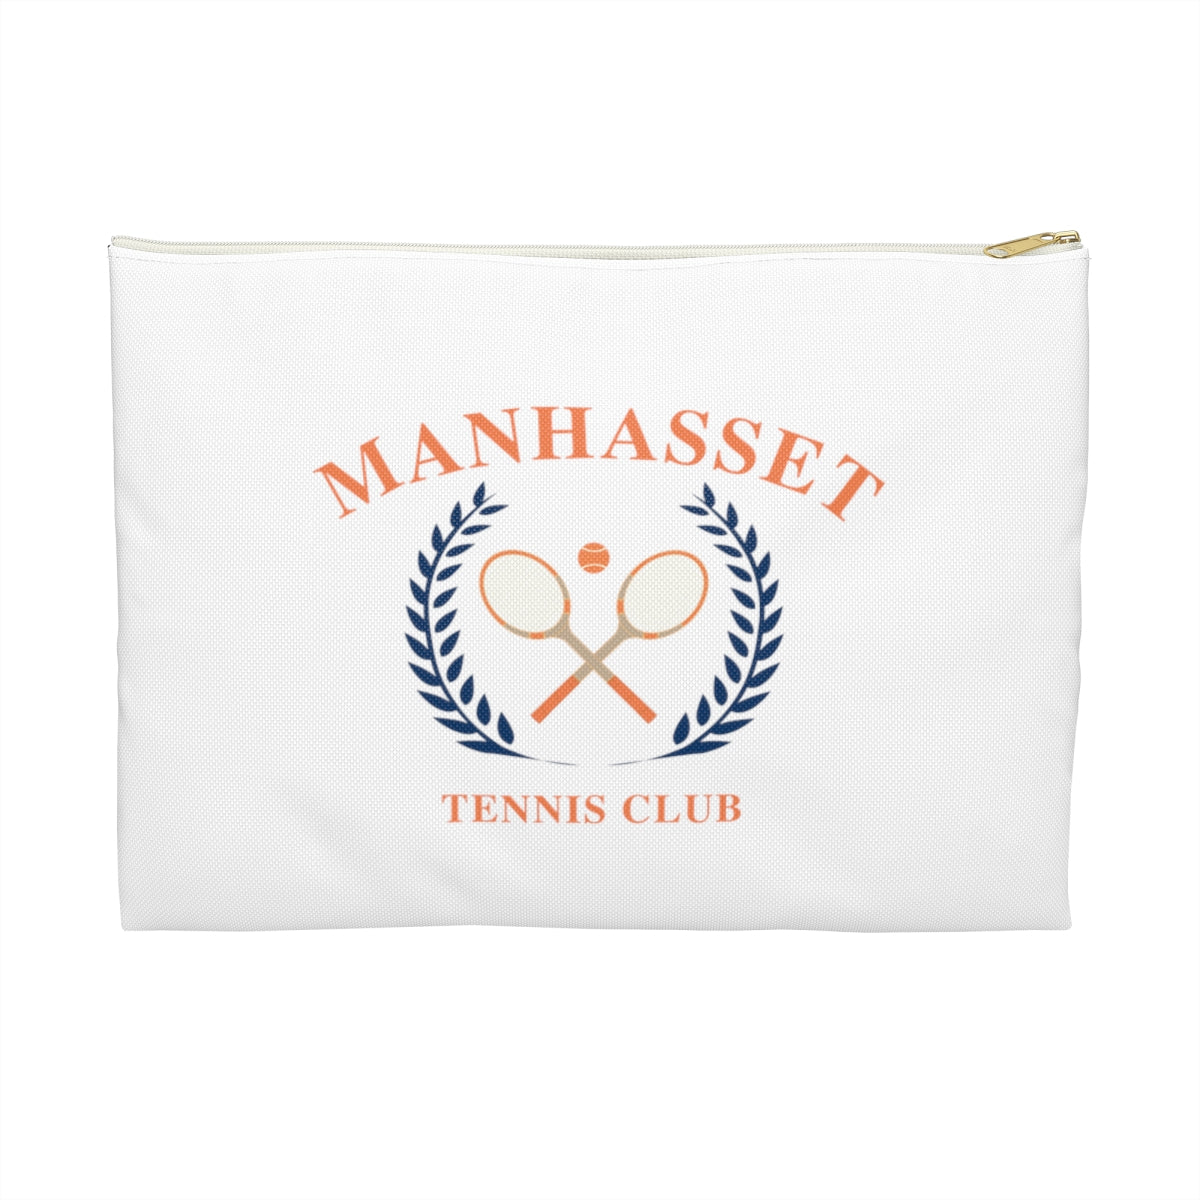 Manhasset Tennis Club Zip Accessory Pouch - Available for your town or Club please email us